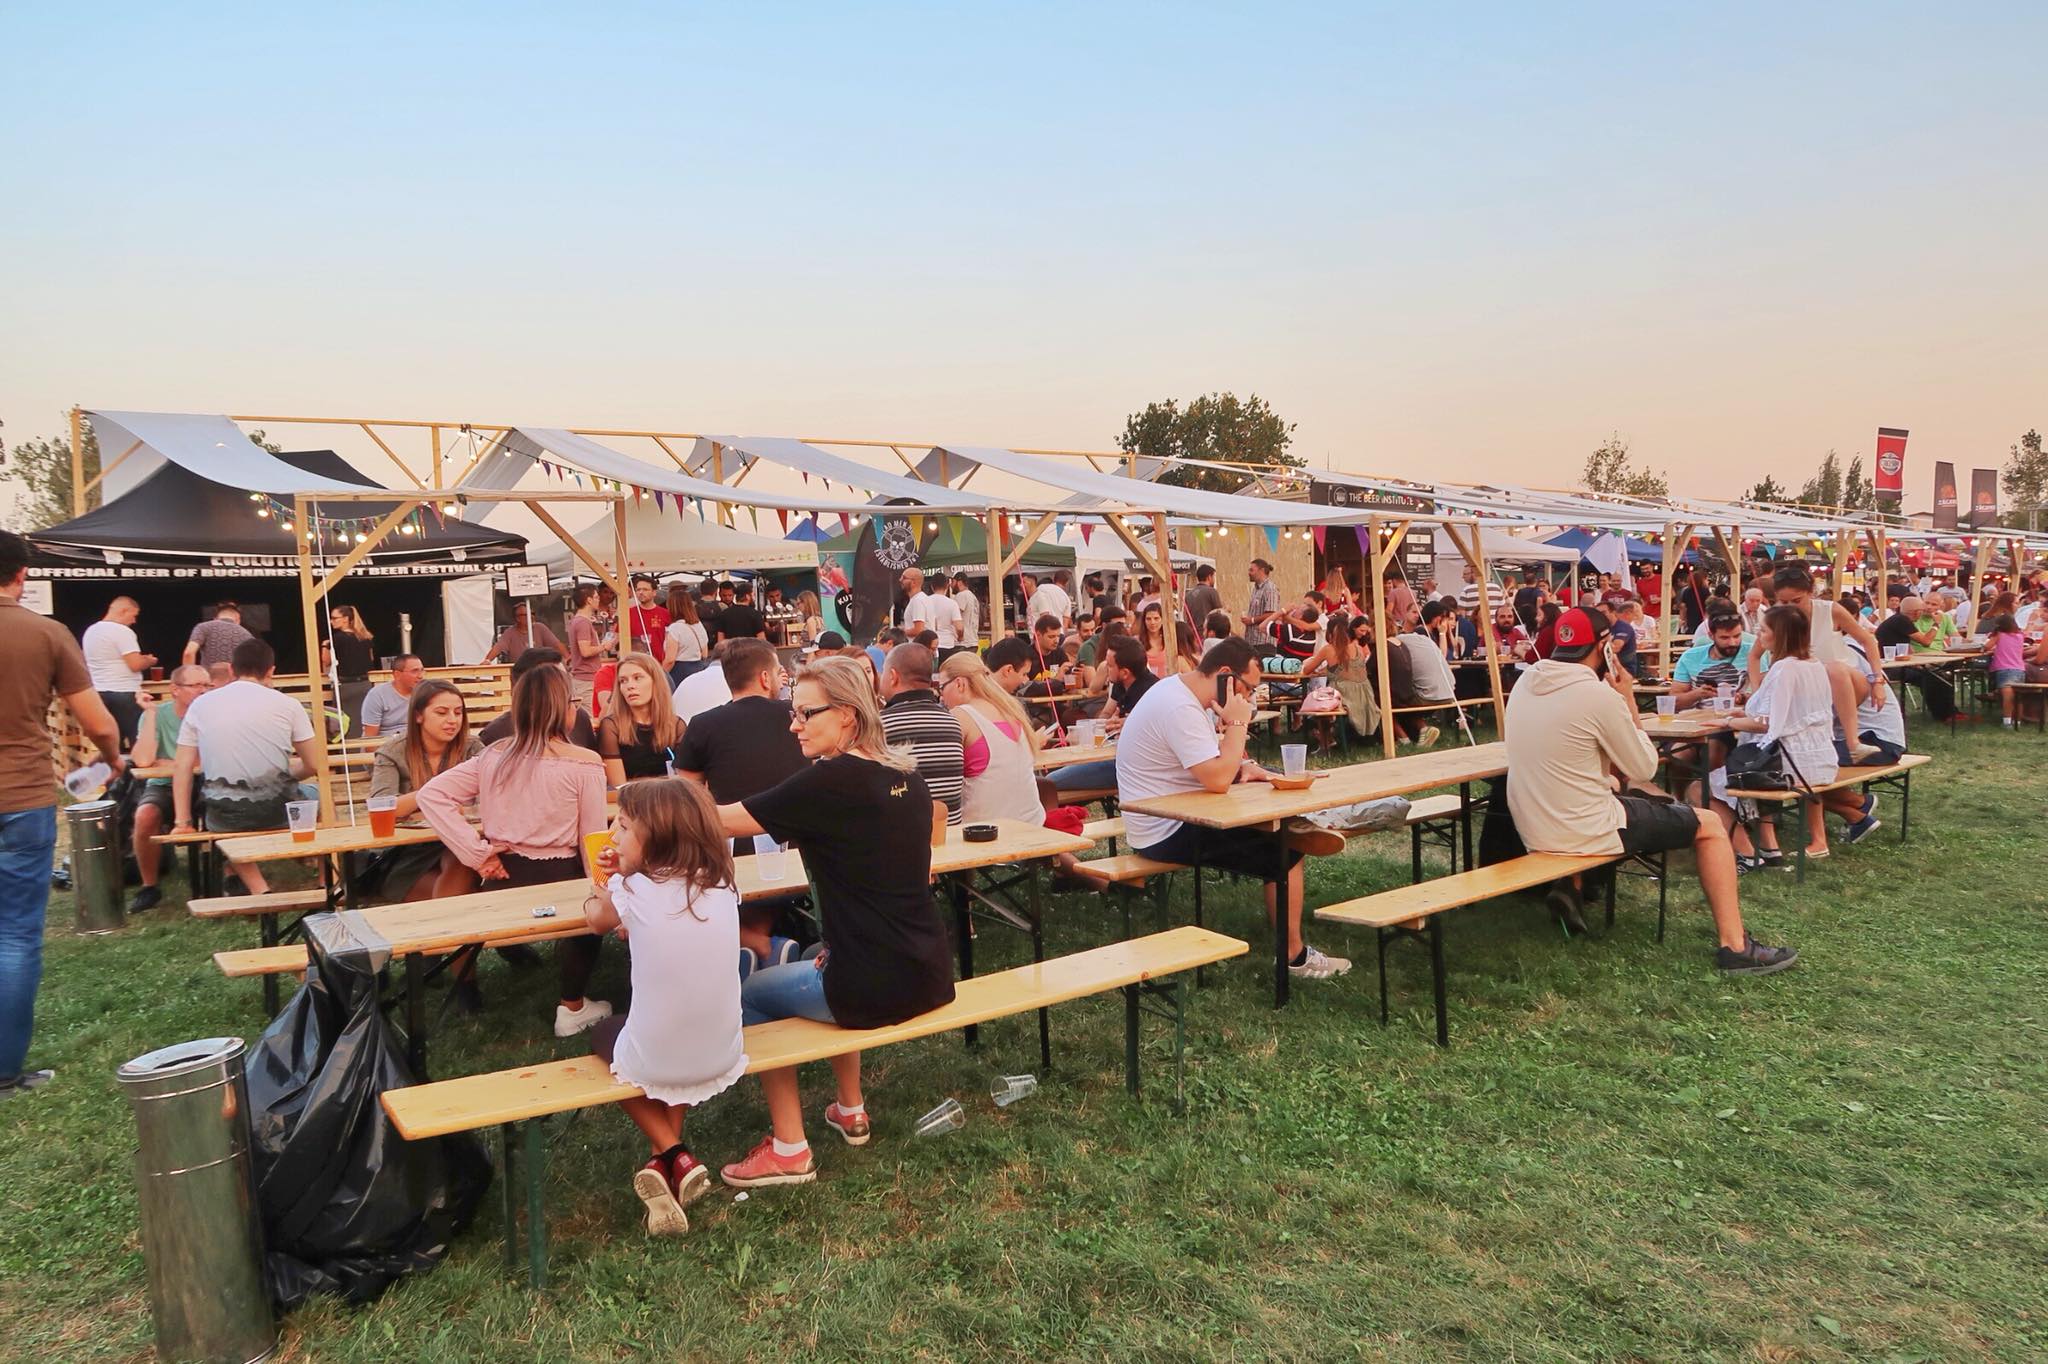 Kach Solo Travels Day 19: Sunday Fun- Attending the Craft Beer Festival in Bucharest, Romania